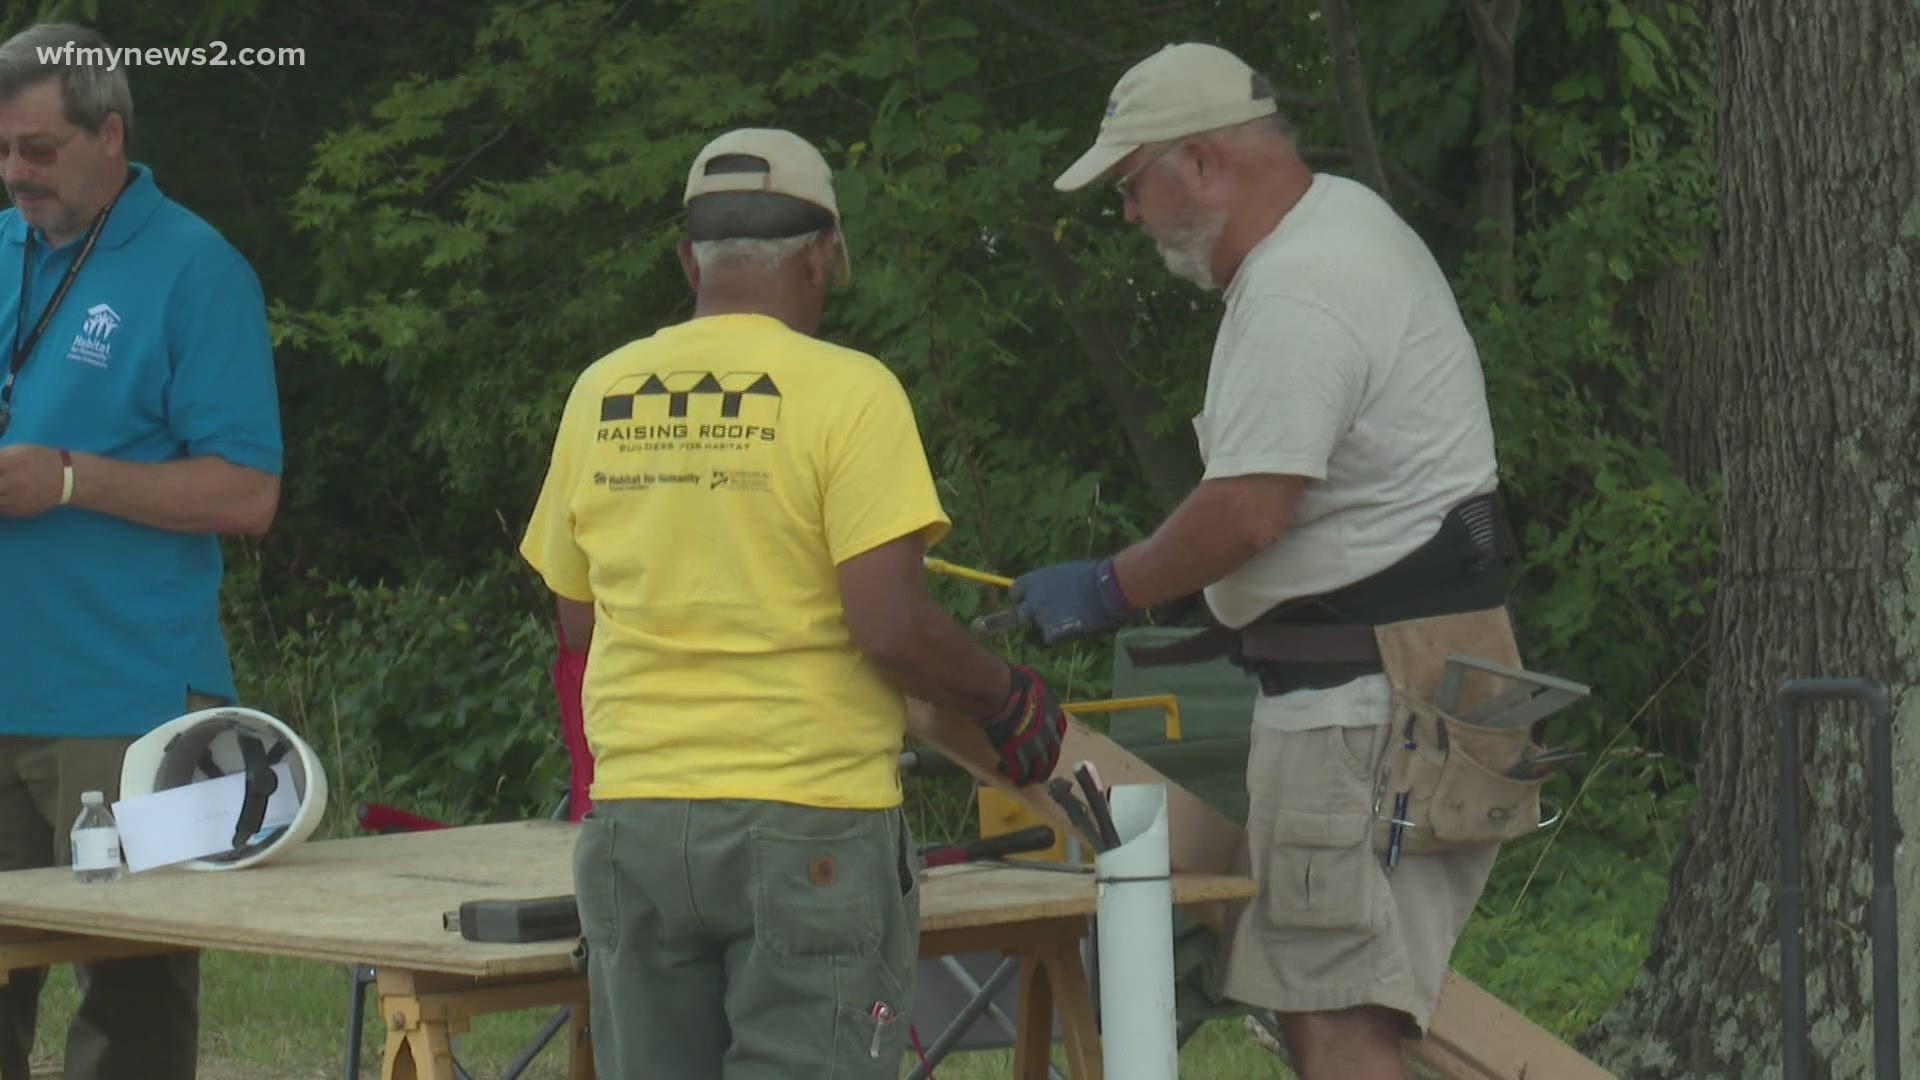 The group of volunteers is one of the driving forces on Habitat for Humanity builds.